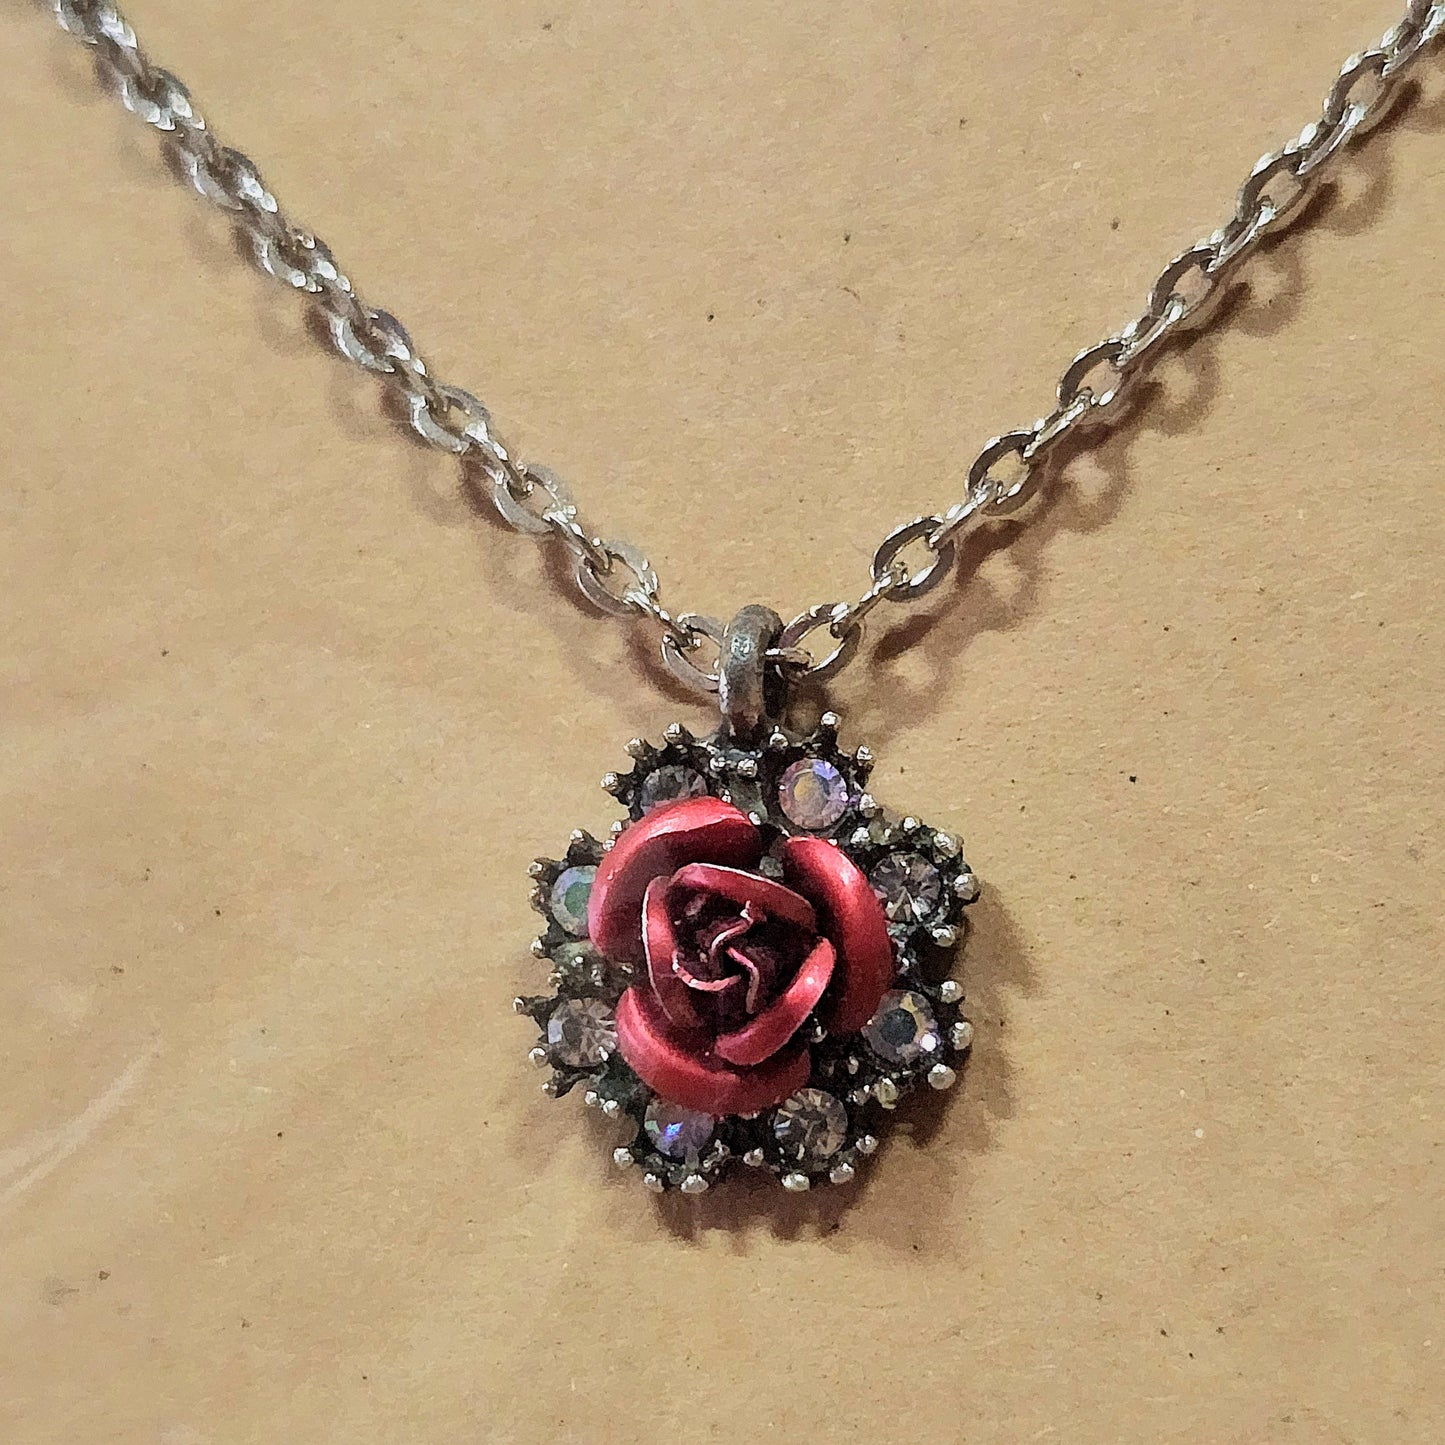 Metal Rose / Swarovski Crystals 20" Necklace and Red 1/2 Hoops